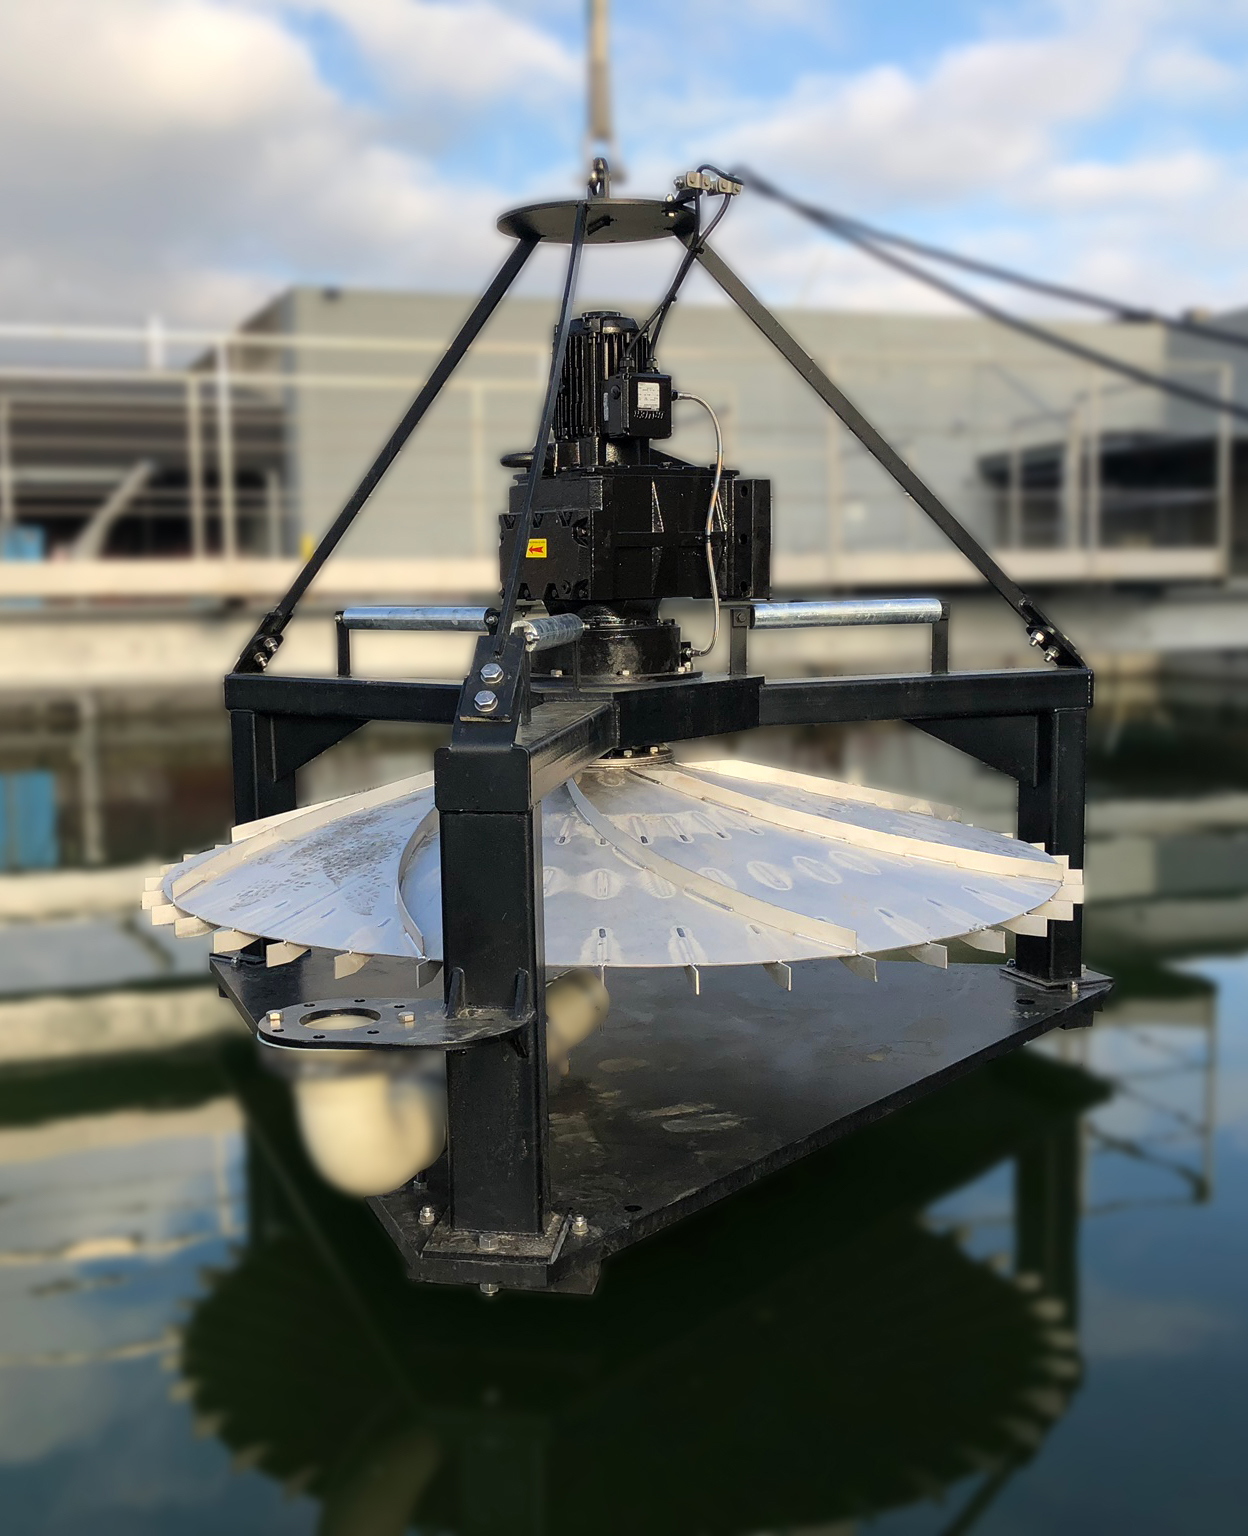 At the front of stand a 1.5 m high BG80 agitator drive will be displayed. Suitable for use at depths of up to 10 m, the unit features a specialised lm2 coating for protection and an IP68 design to combat ingress